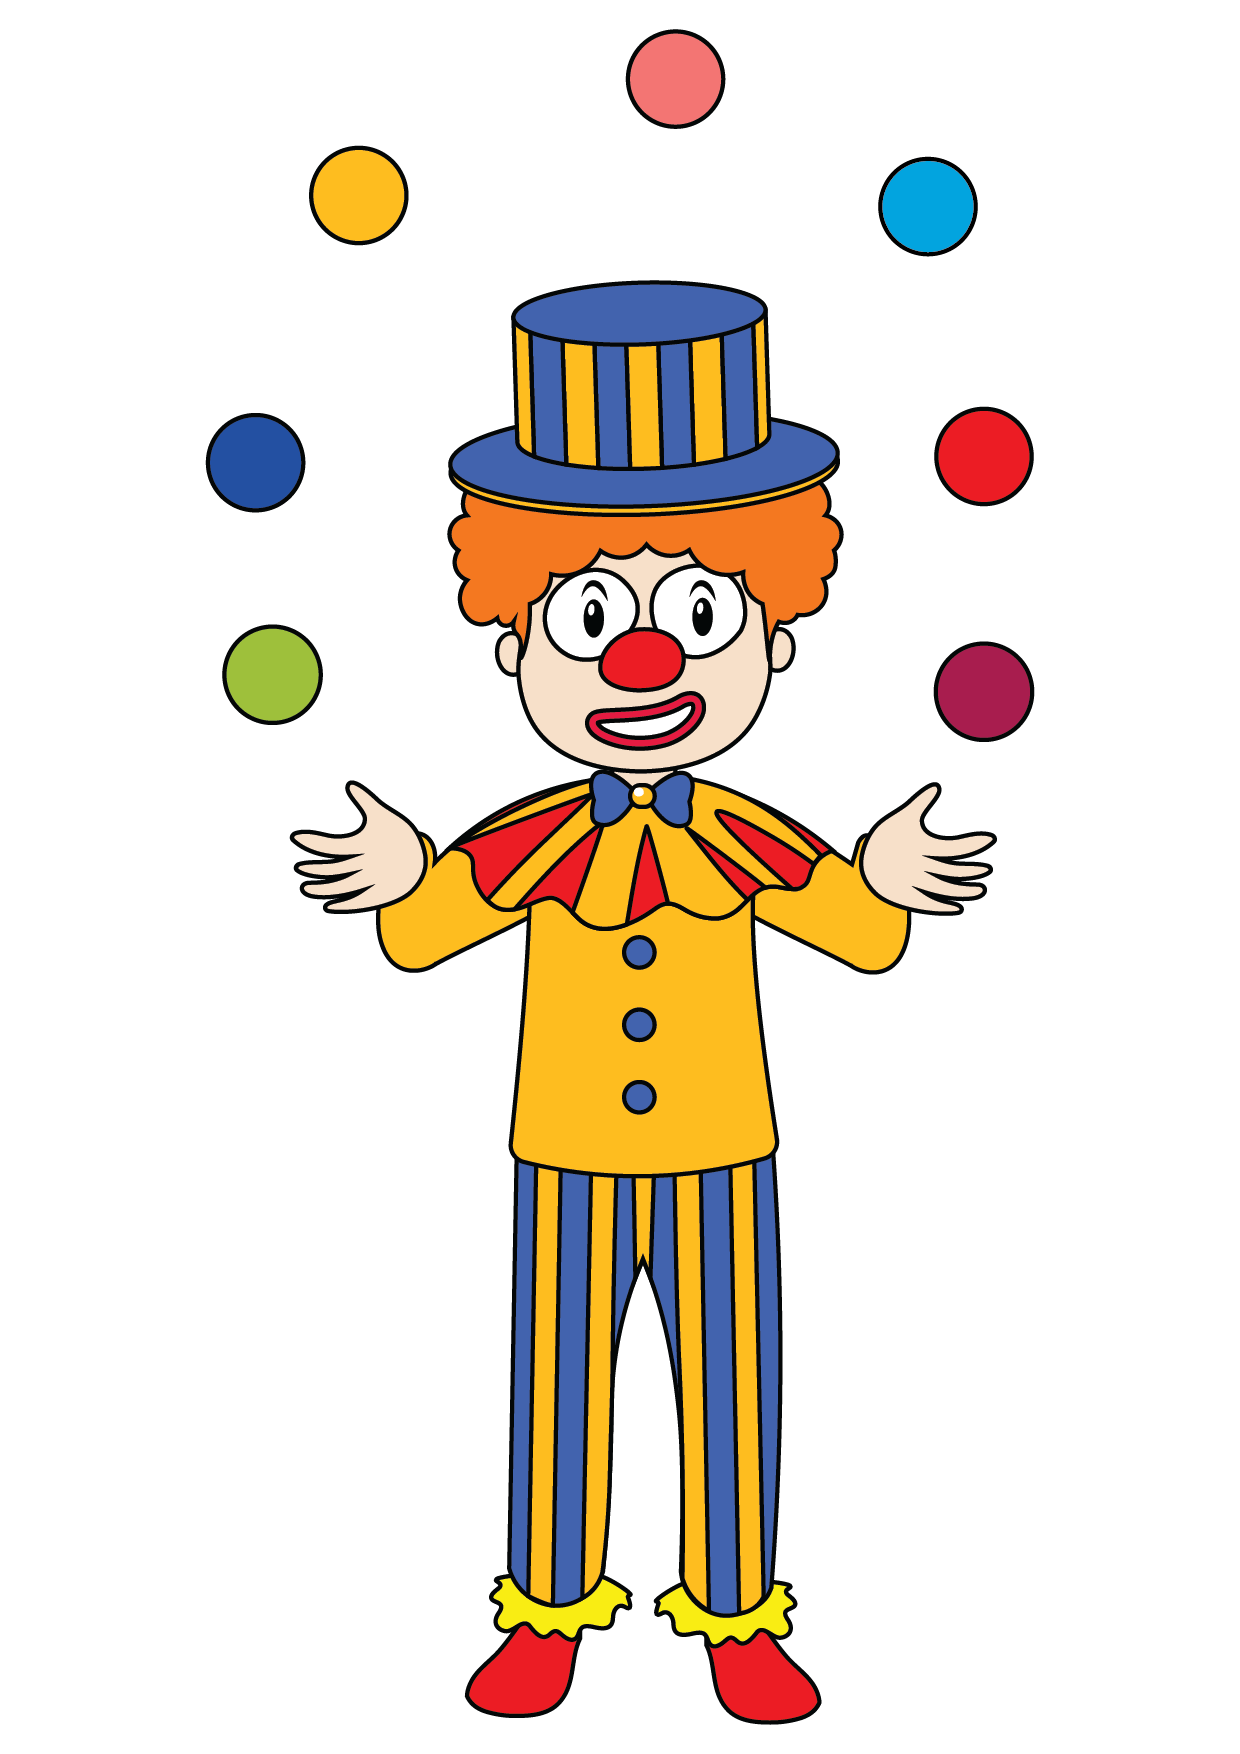 How to Draw A Clown Step by Step Printable